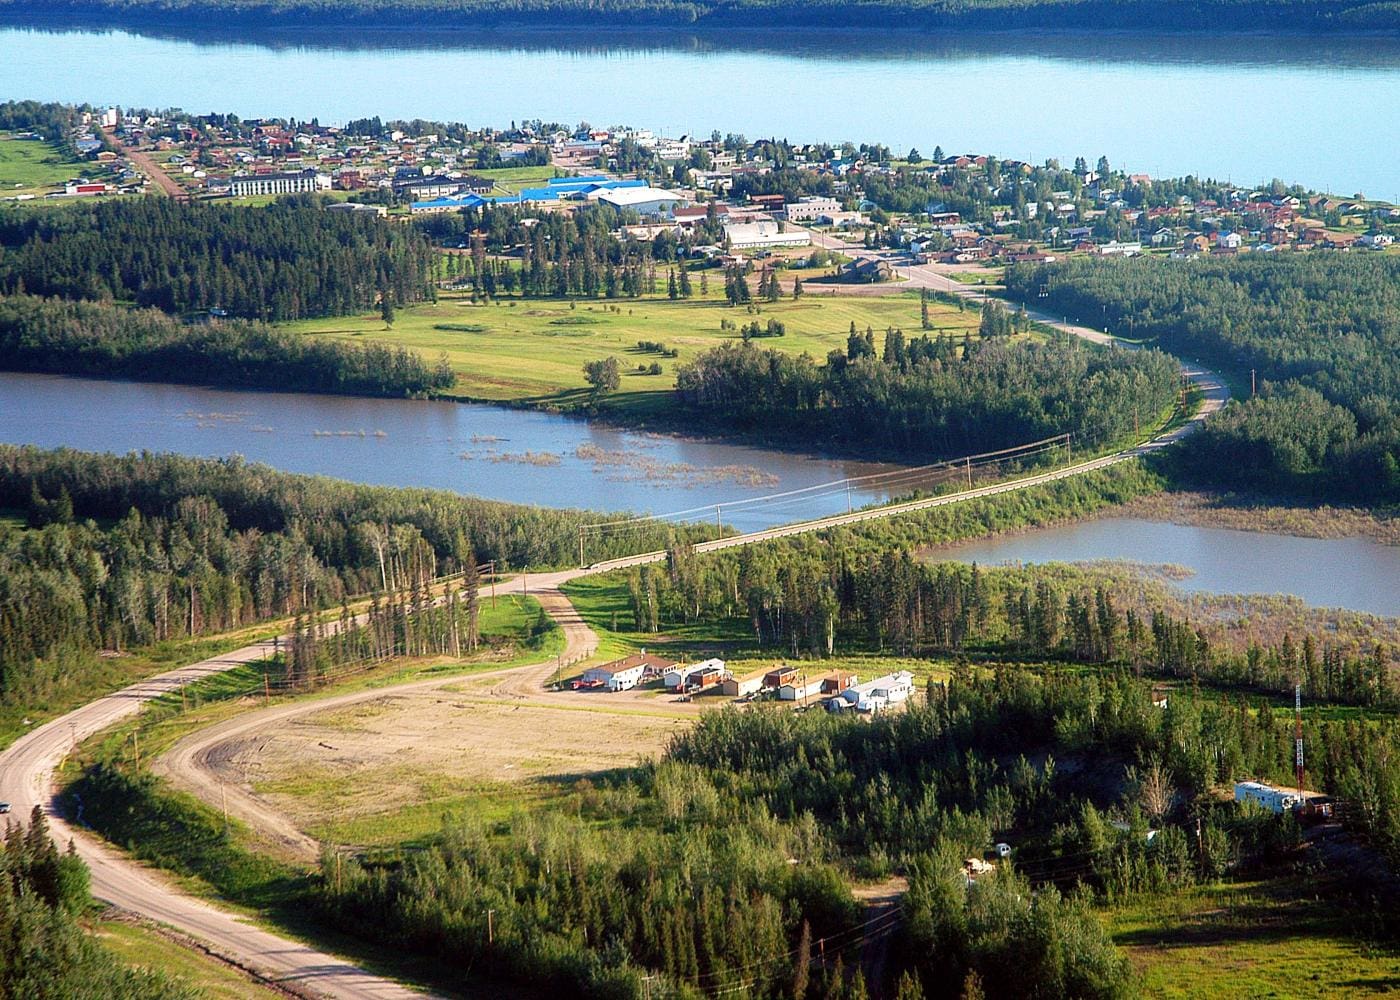 A view of the water from above shows a road, houses and trees.